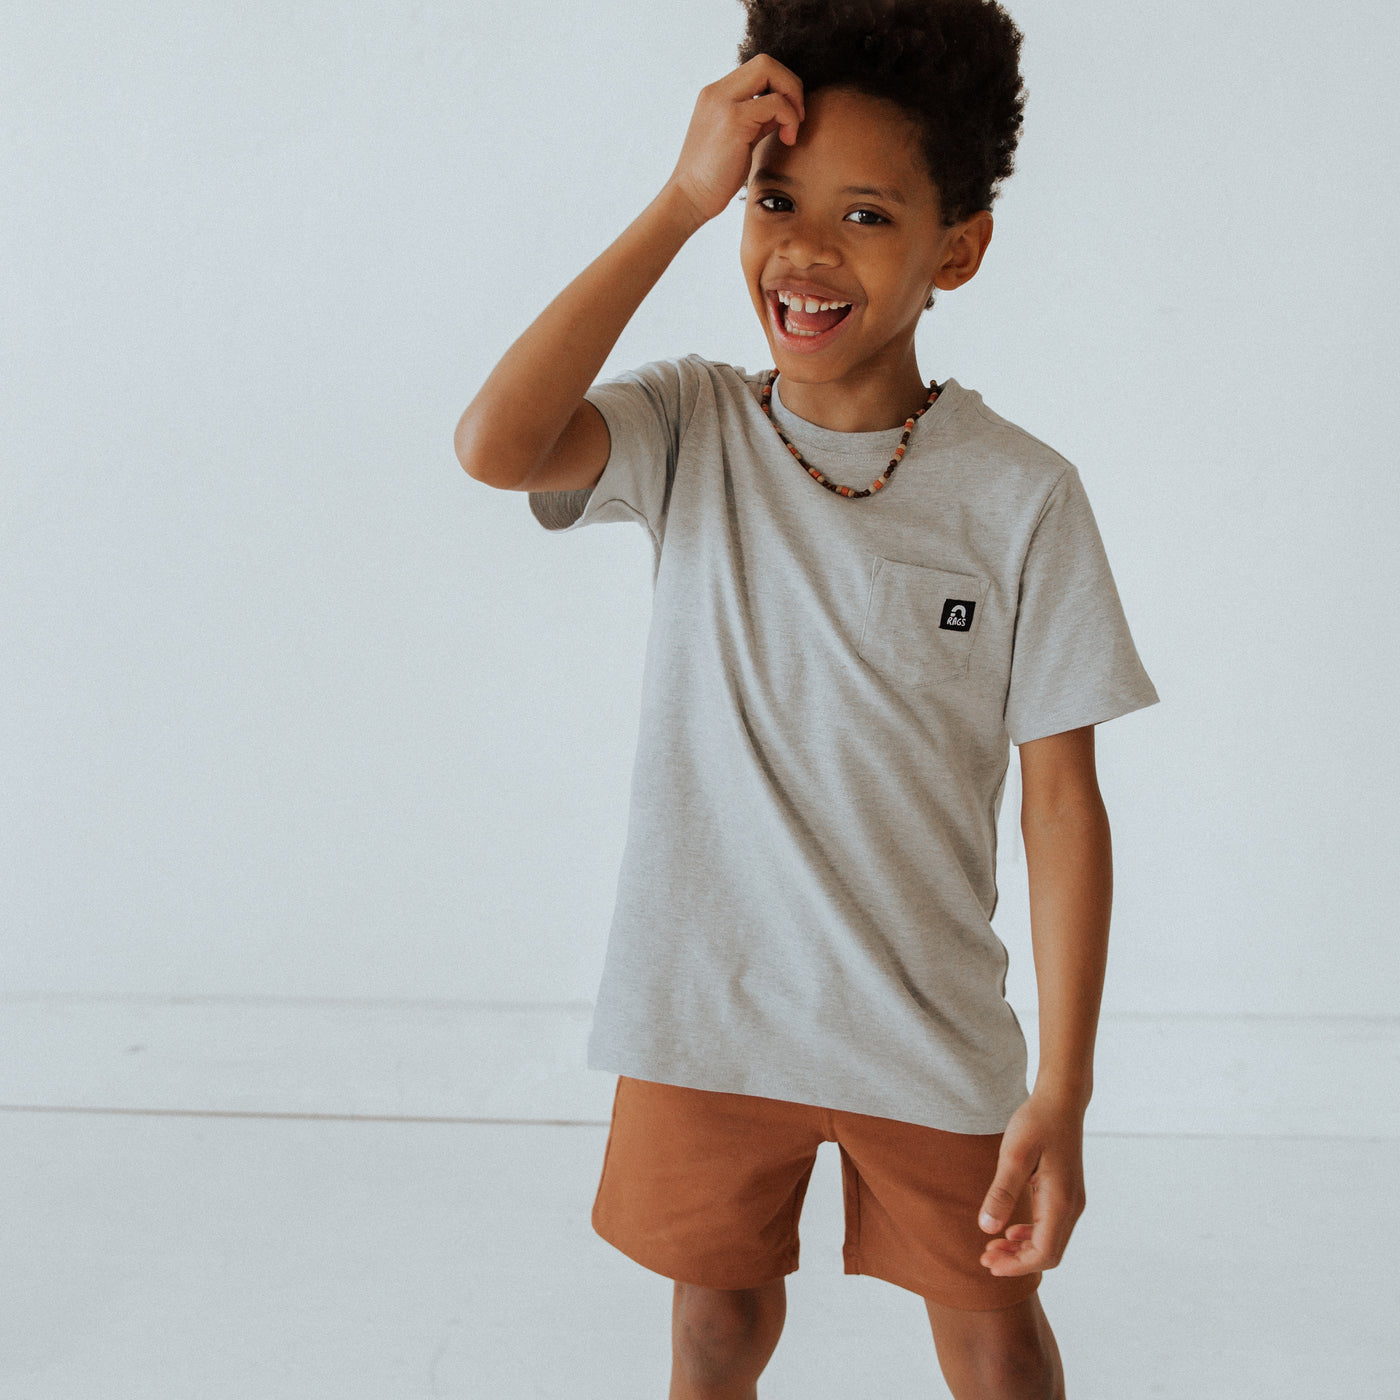 Essentials Short Sleeve Chest Pocket Rounded Kids Tee - 'Heather Gray'